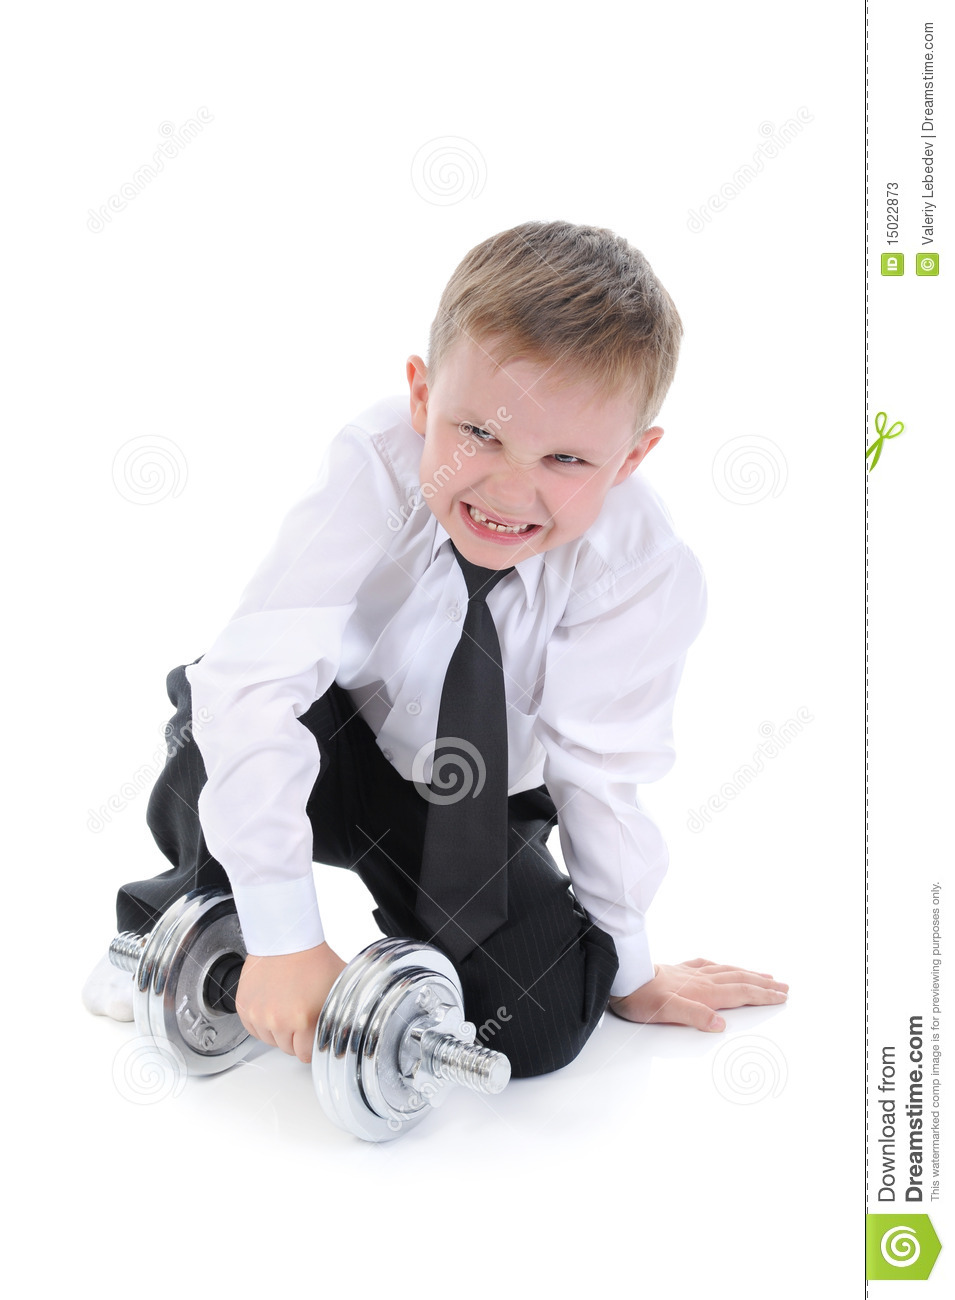 Boy In The Shirt Lifts Weights  Stock Photos   Image  15022873